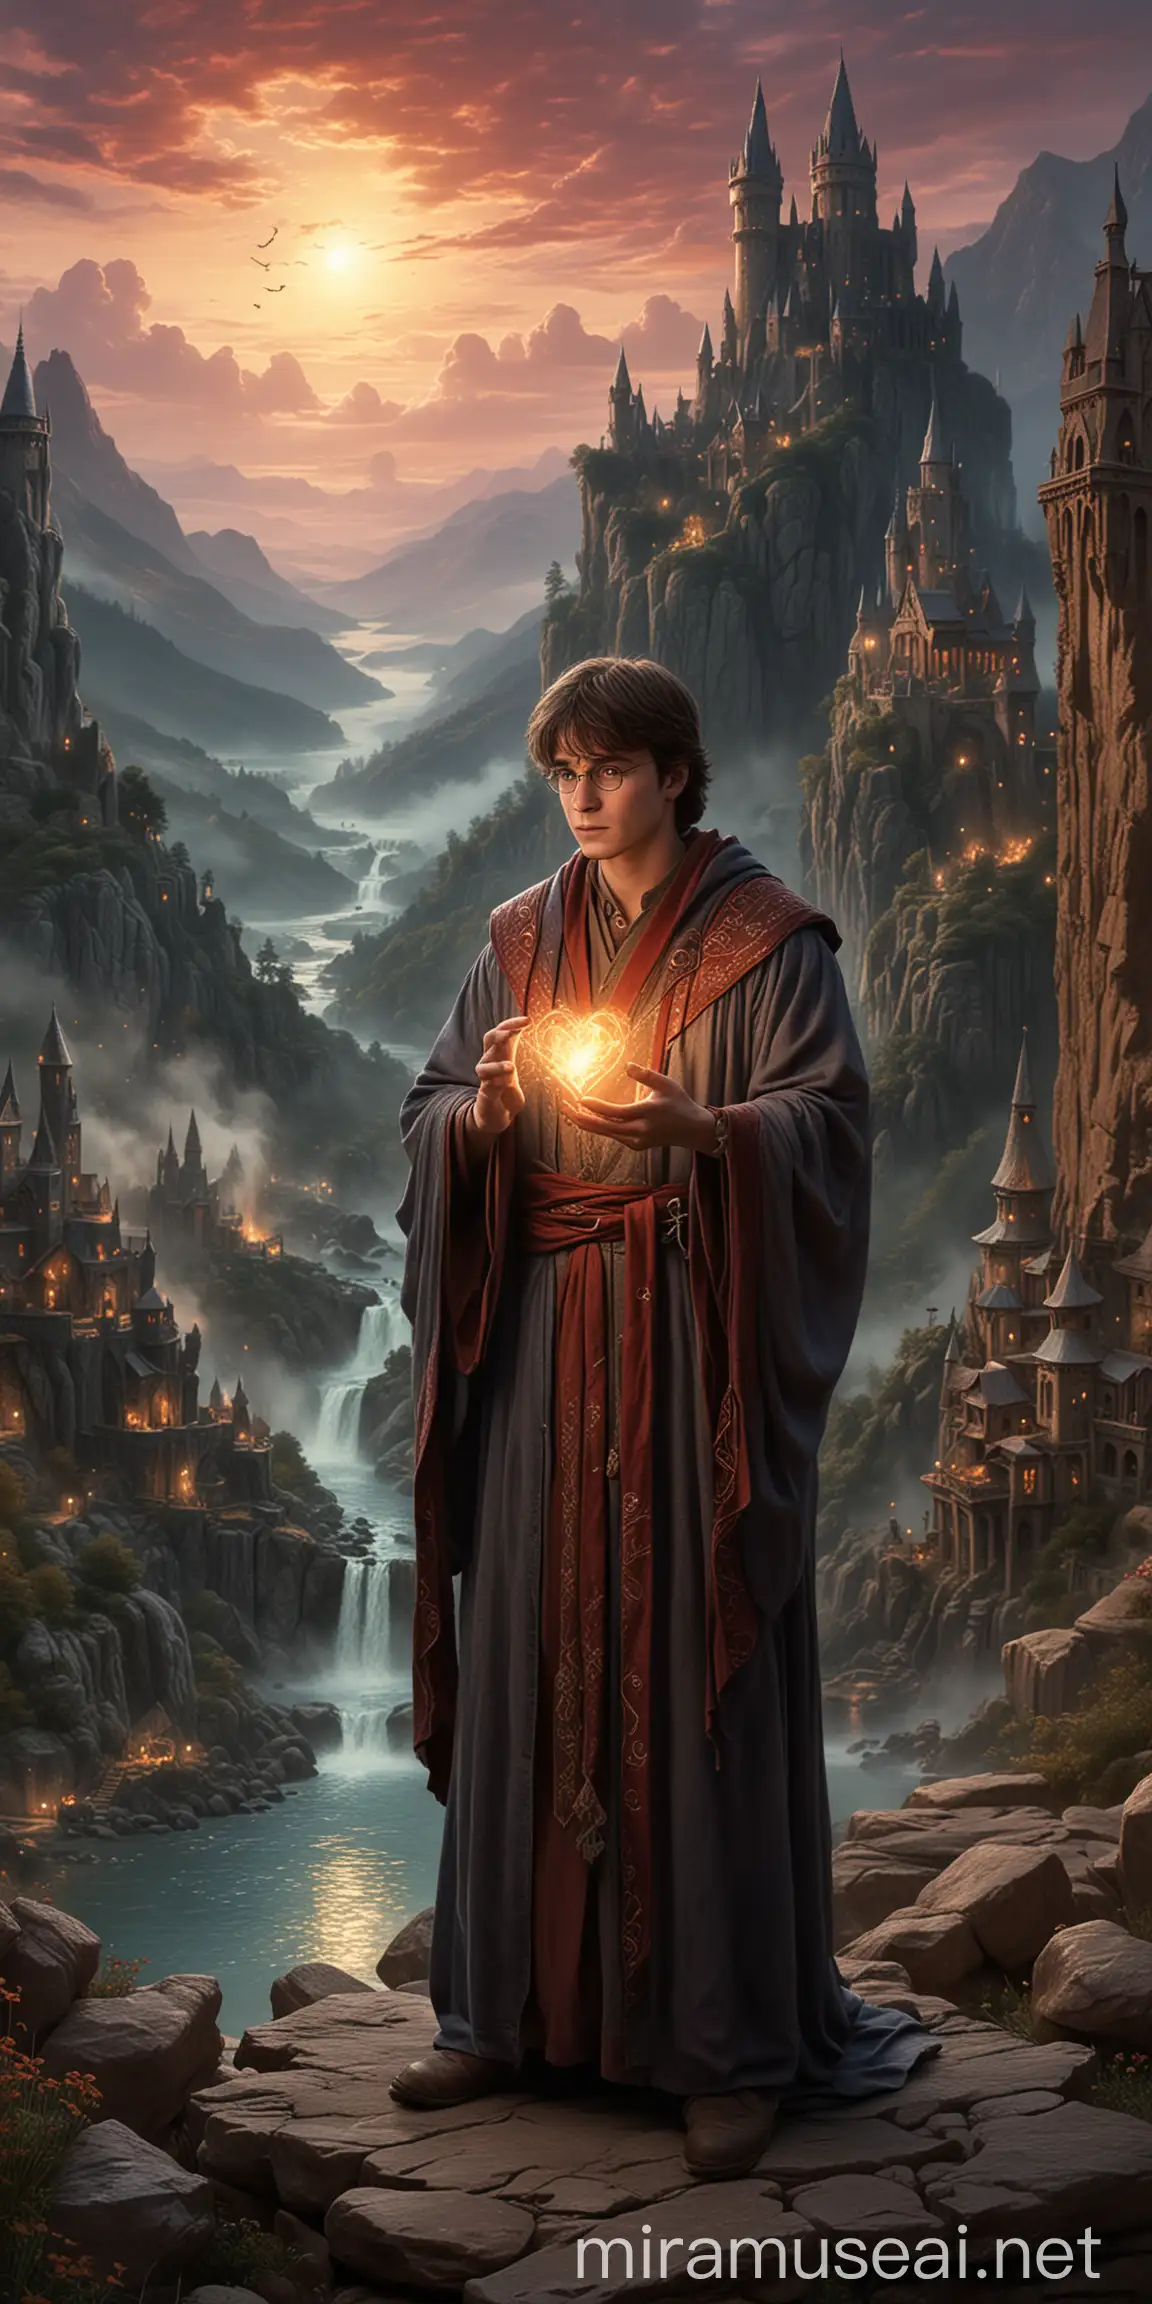 Wizard Harry Potter Holding Heart in Game of Thrones Mythical Realm